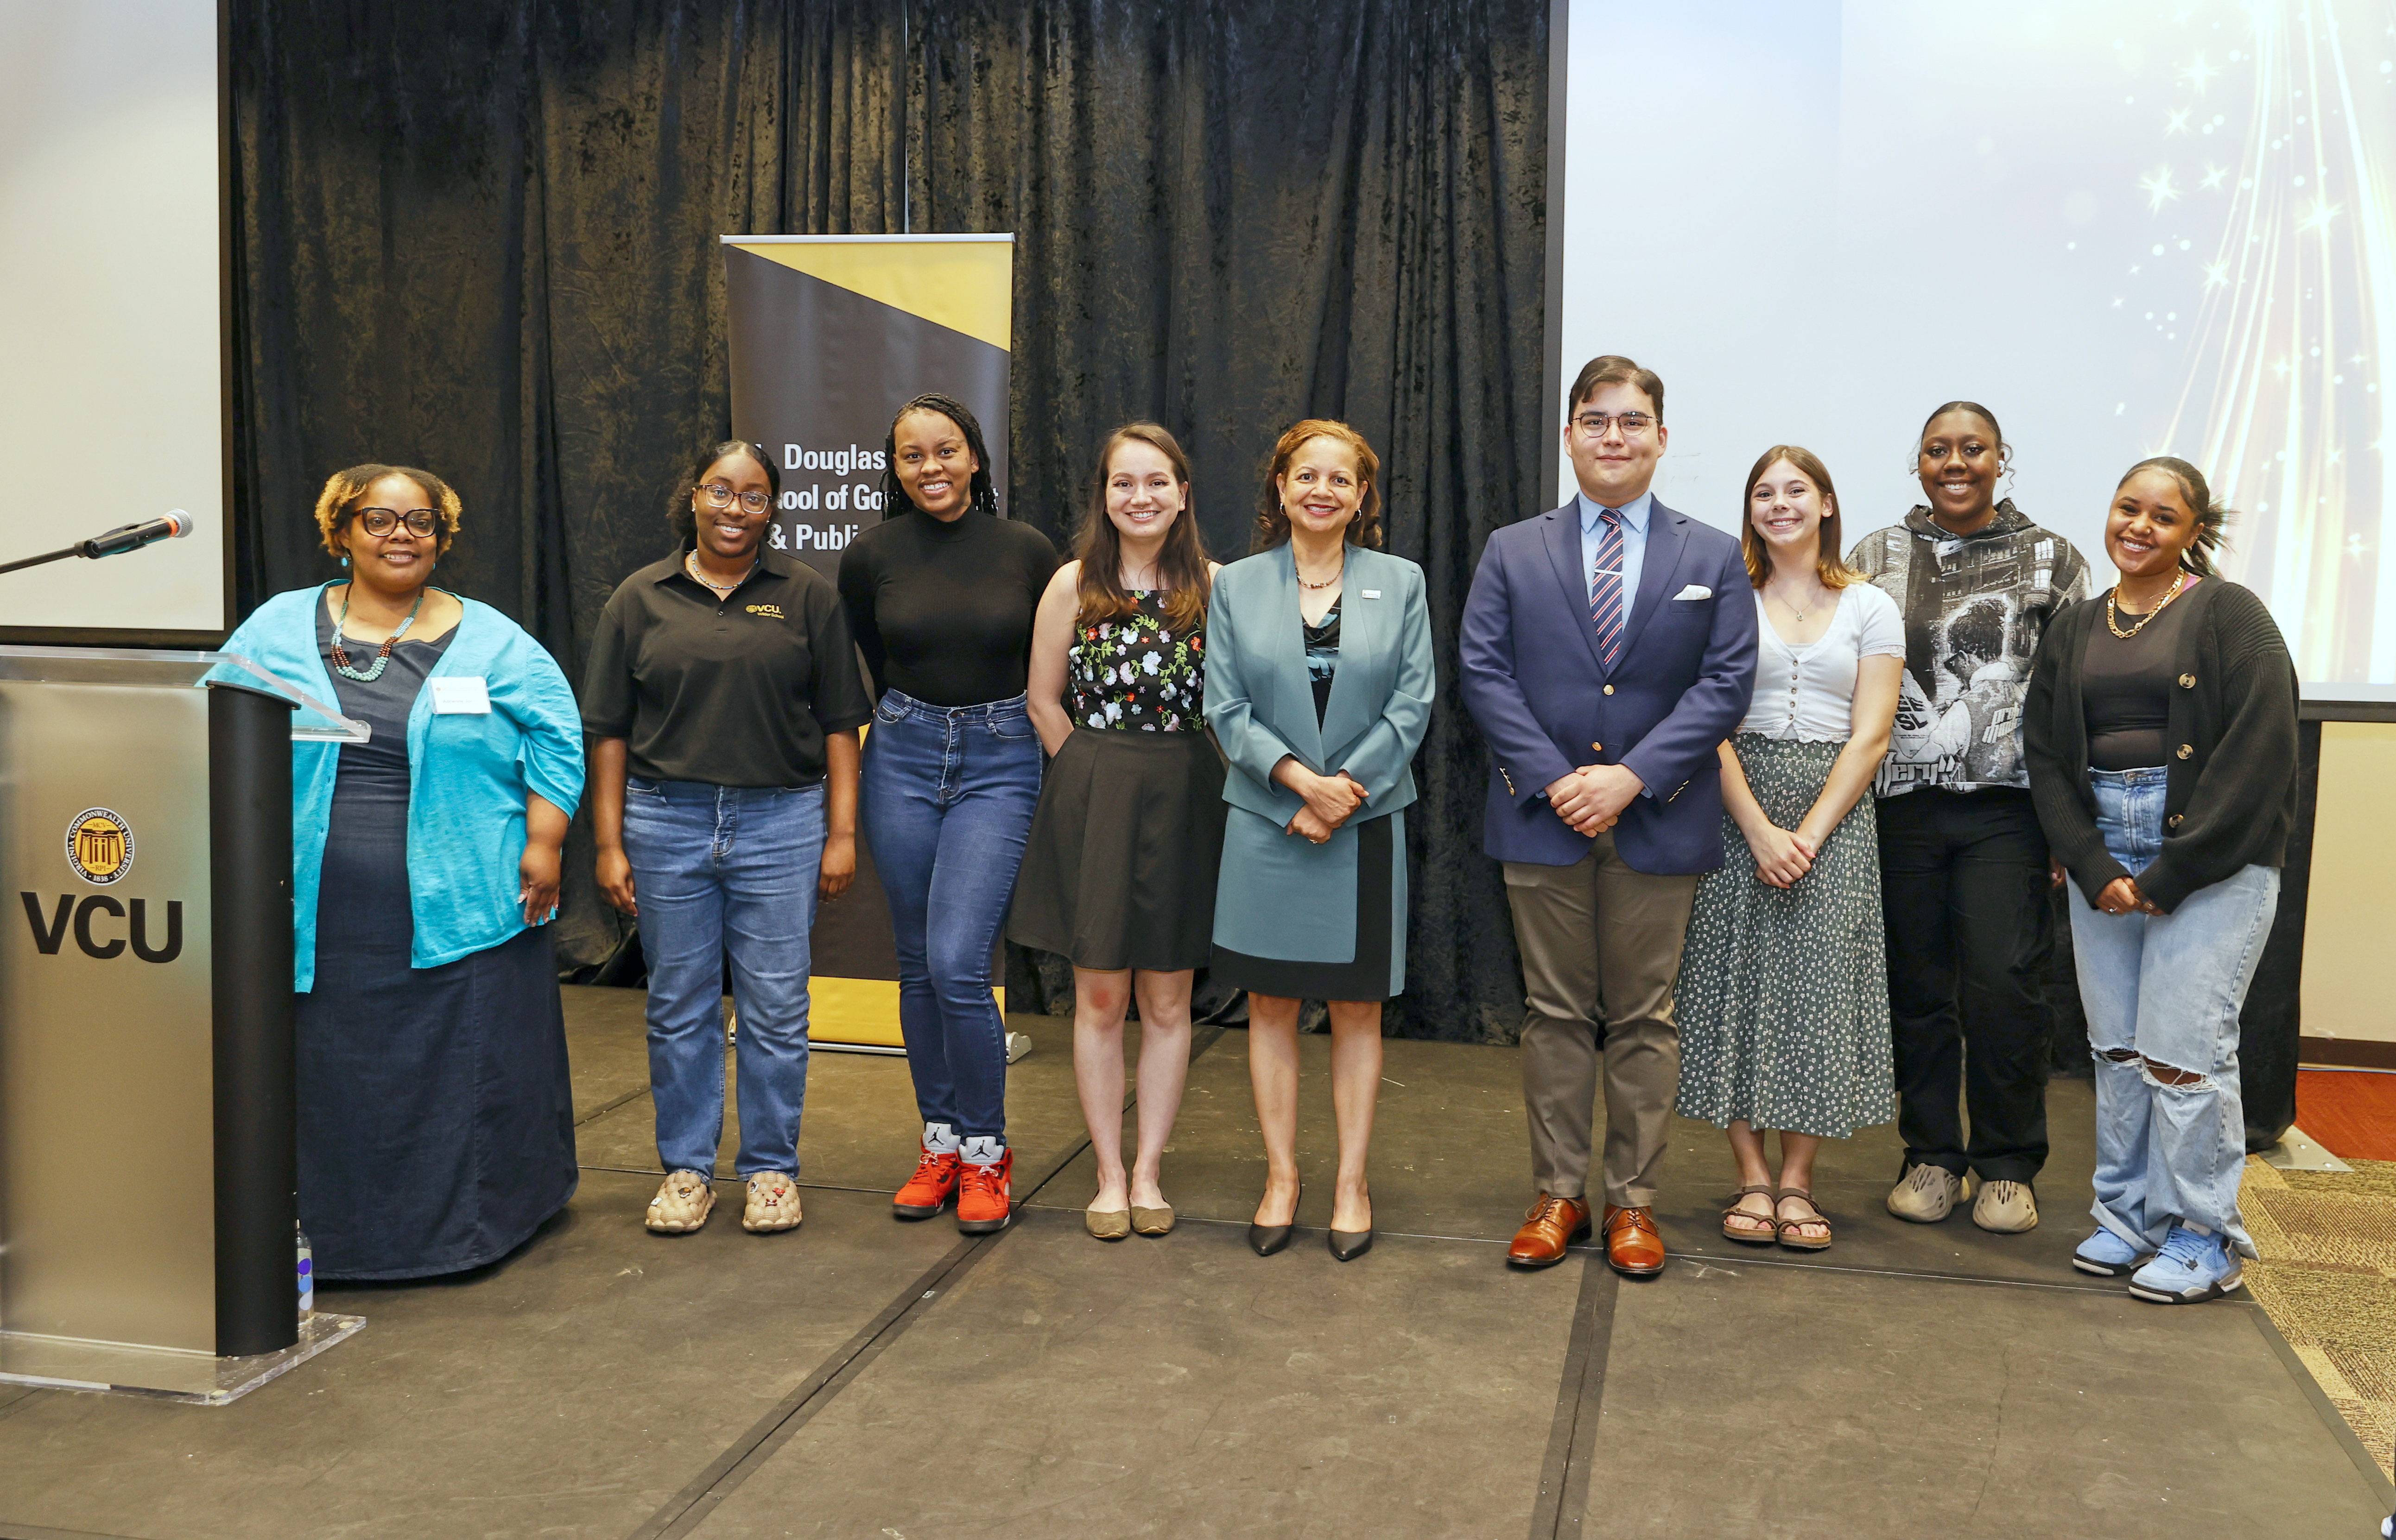 Dean Gooden poses with Student Ambassadors at the Student Recognition Ceremony and Reception held at the VCU Student Commons on April 25, 2023.